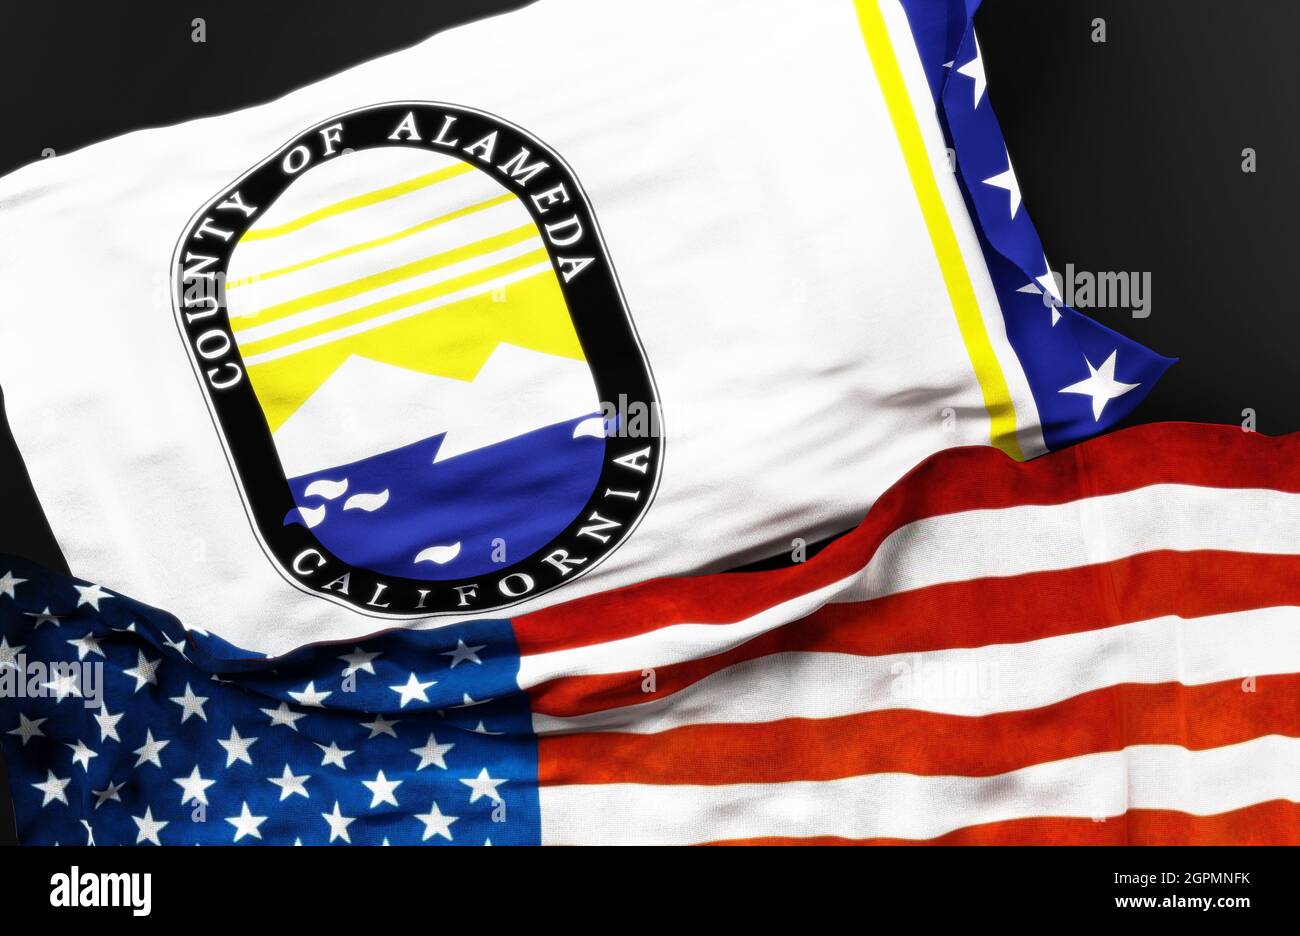 Flag of Alameda County California along with a flag of the United States of America as a symbol of unity between them, 3d illustration Stock Photo